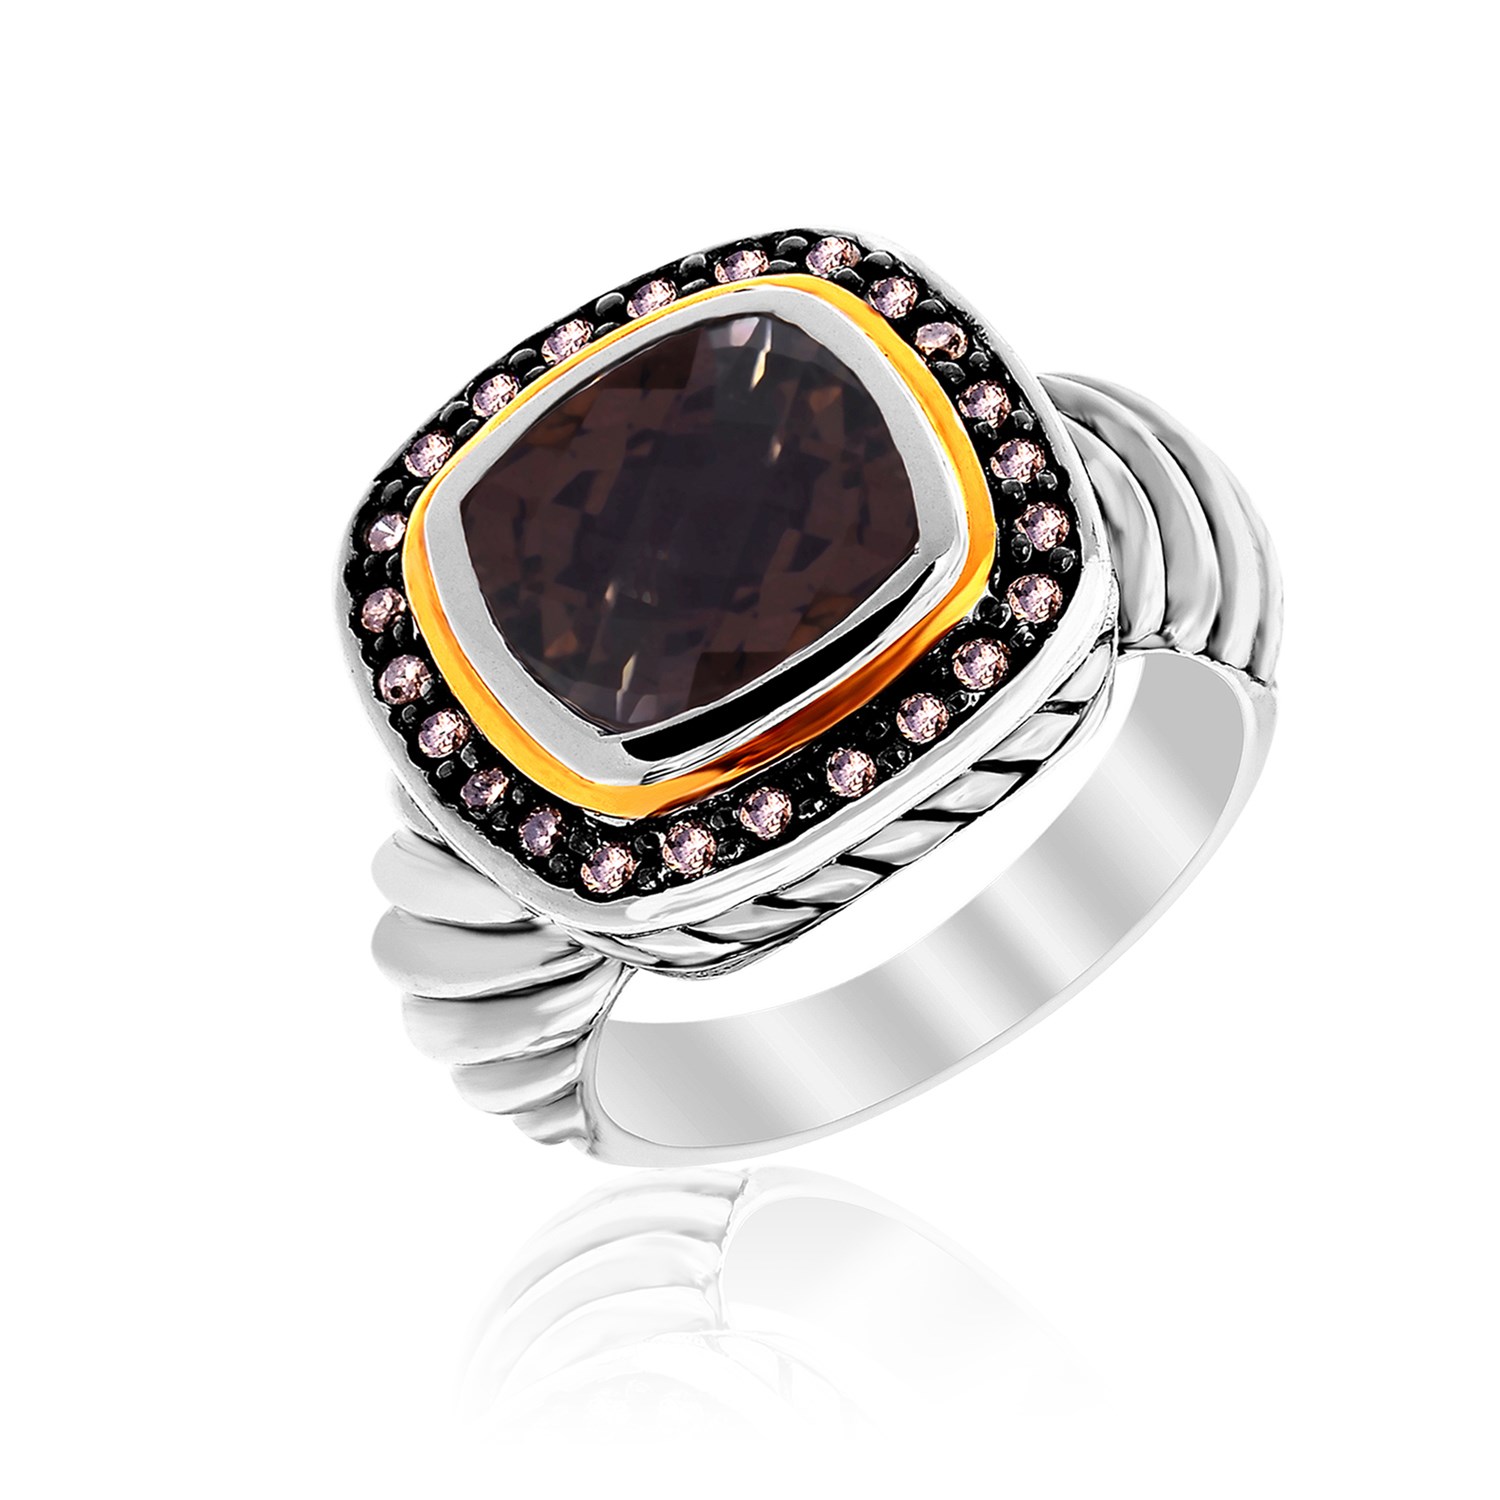 Smokey Quartz and Diamond Ring in 18K Yellow Gold and Sterling Silver